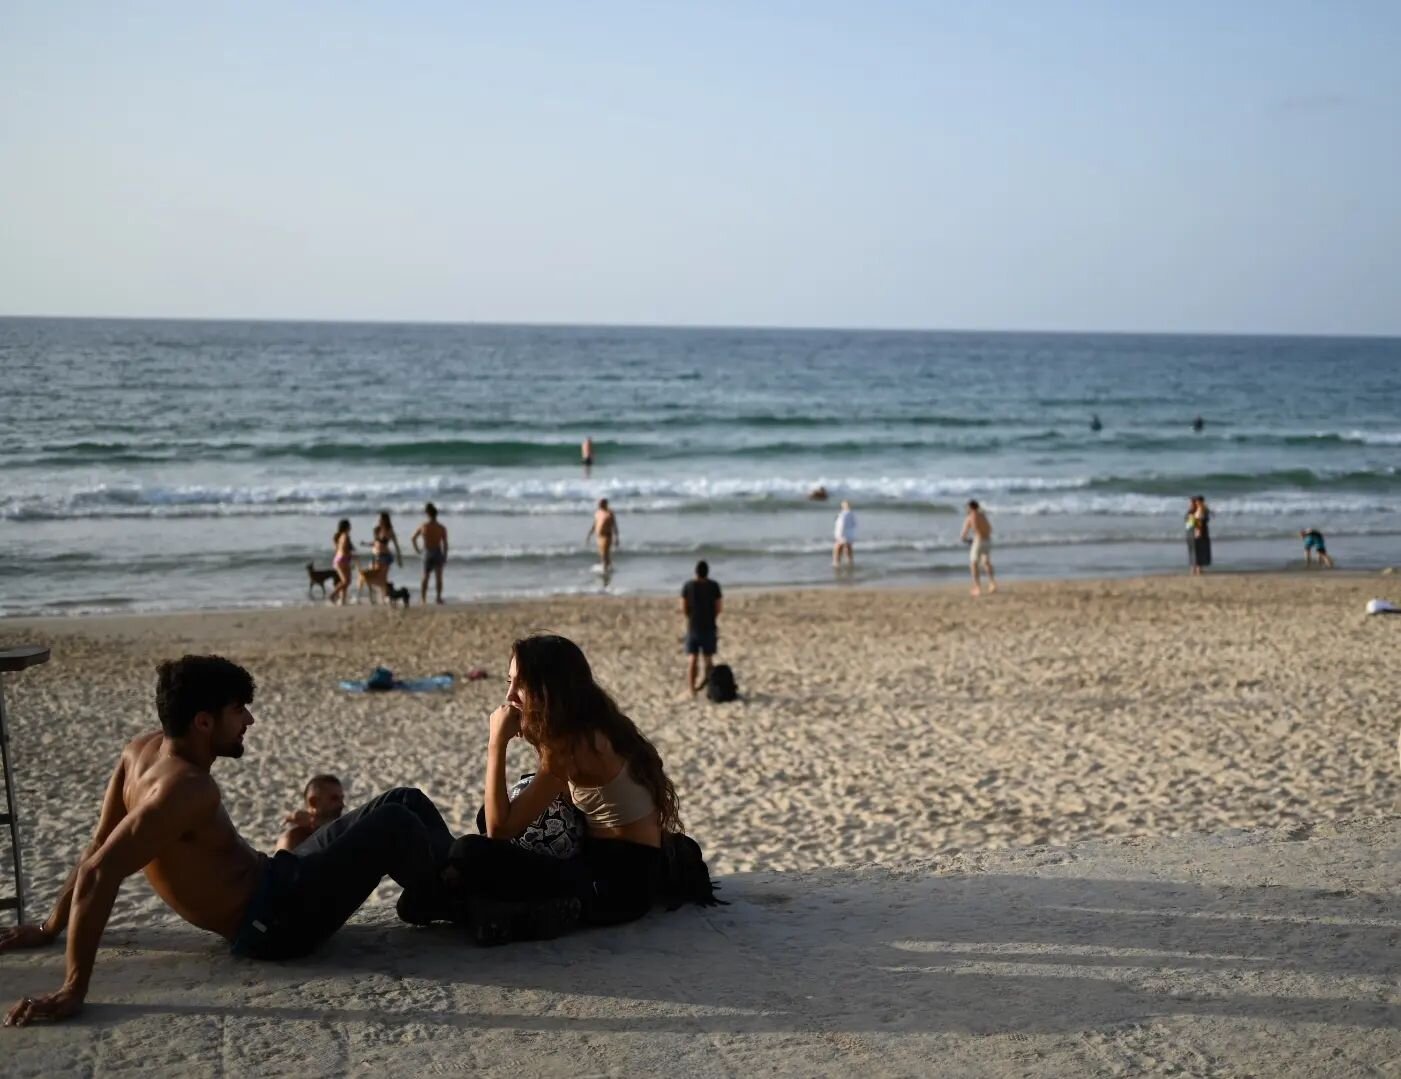 Feeling an aftertaste of a a good time in Israel. Not only I met my parents, but also had a chance to merge with the atmosphere and vibe of Tel Aviv. 

I spent the very last day by myself. I remember wearing a swimsuit under my dress all day and neve